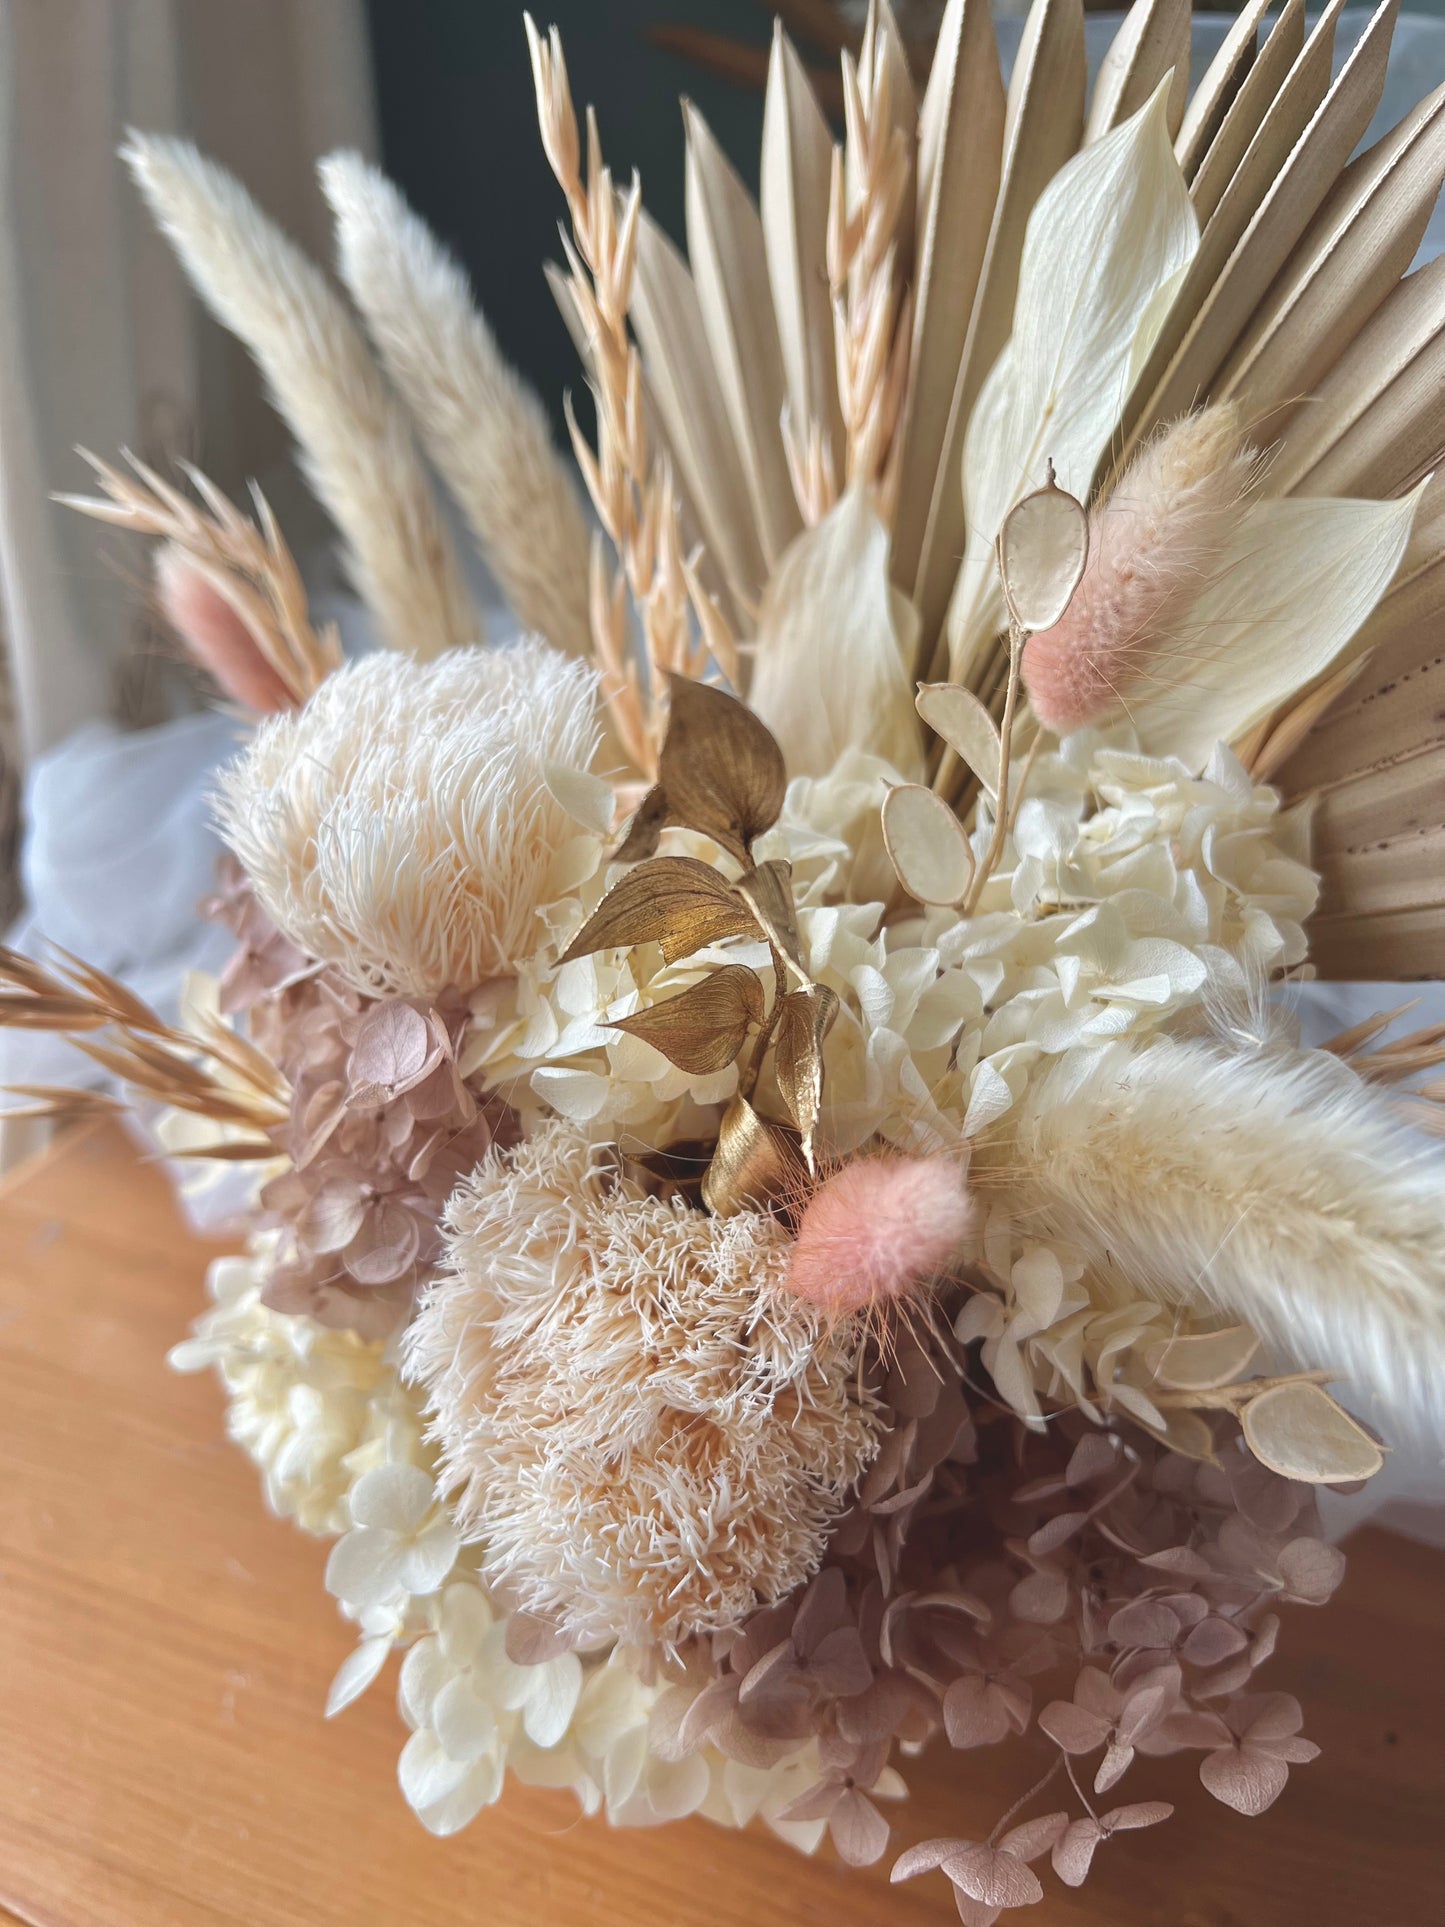 Boho Style Dried Flower Arrangement, Boho House Floral Decoration Ivory and Earthy Tones with Hessian Pot